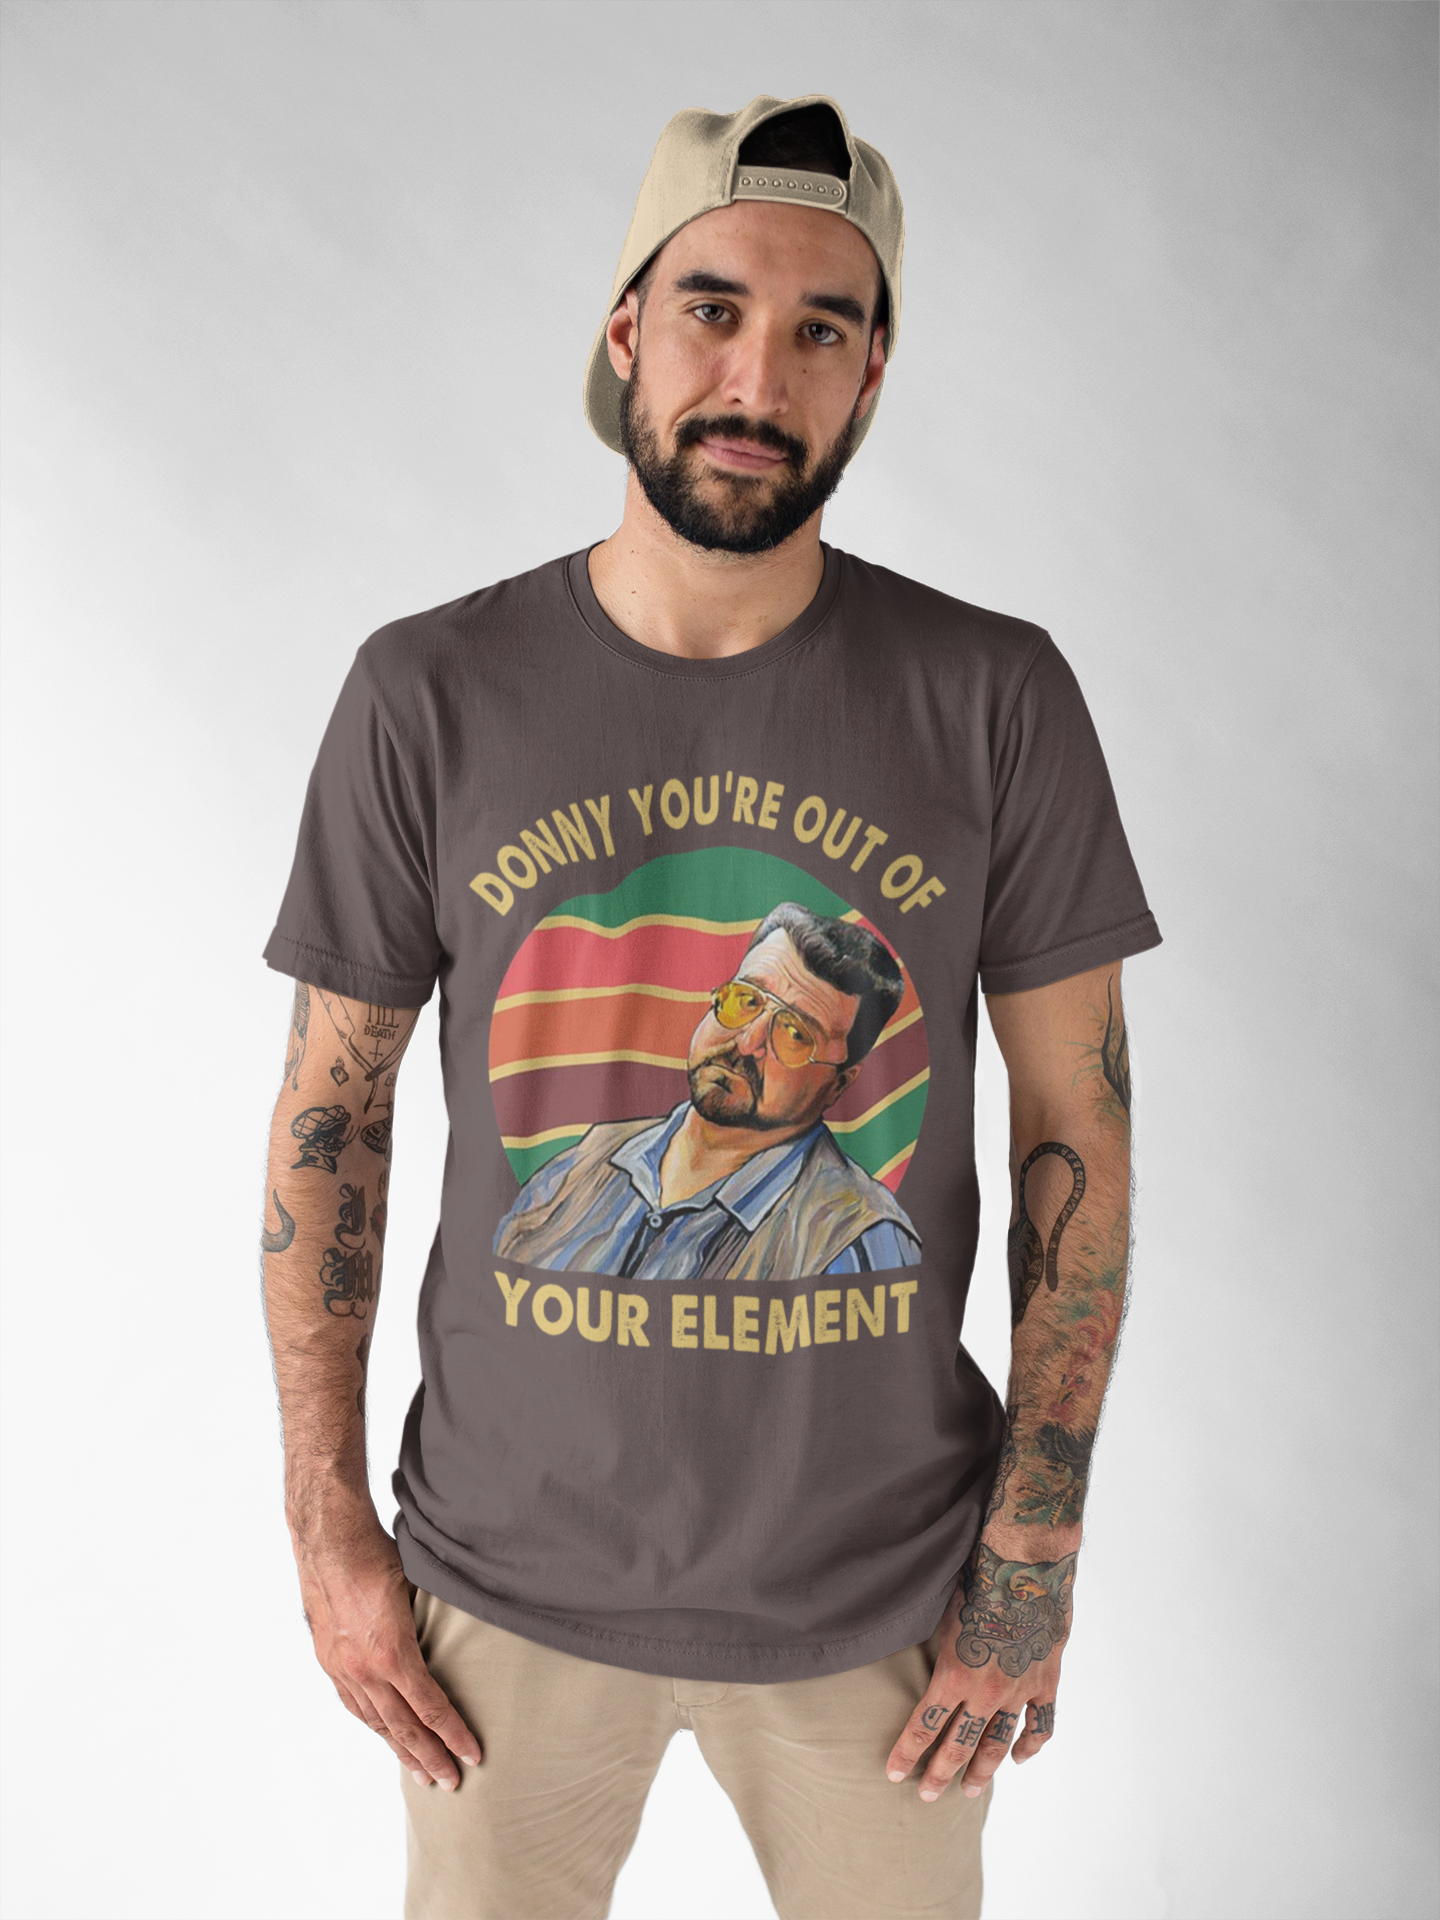 The Big Lebowski Vintage T Shirt, Donny Youre Out Of Your Element Tshirt, Walter Sobchak T Shirt